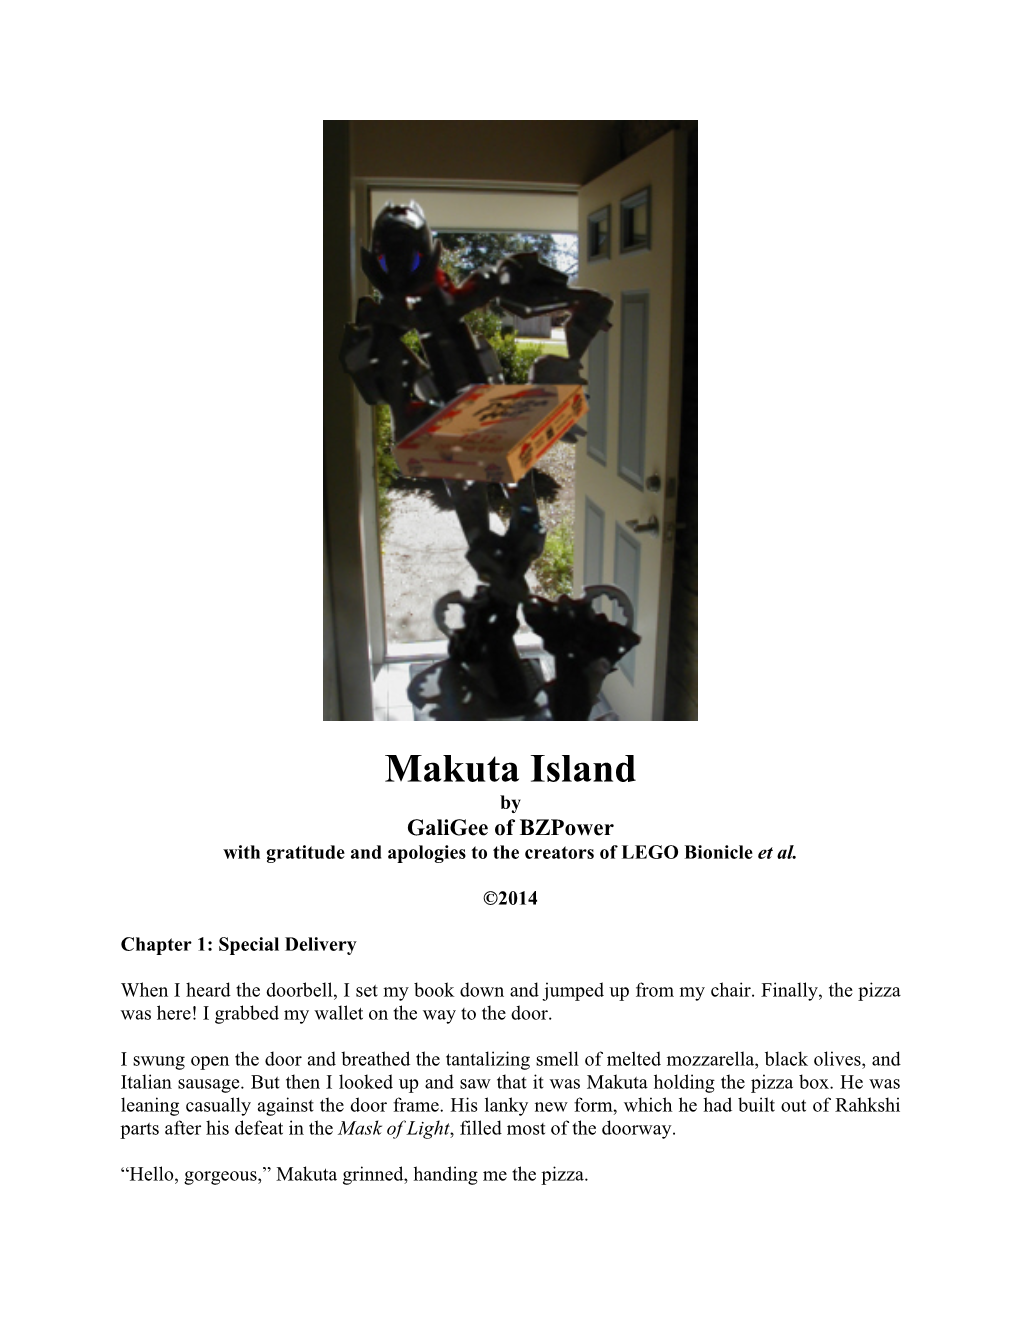 Makuta Island by Galigee of Bzpower with Gratitude and Apologies to the Creators of LEGO Bionicle Et Al